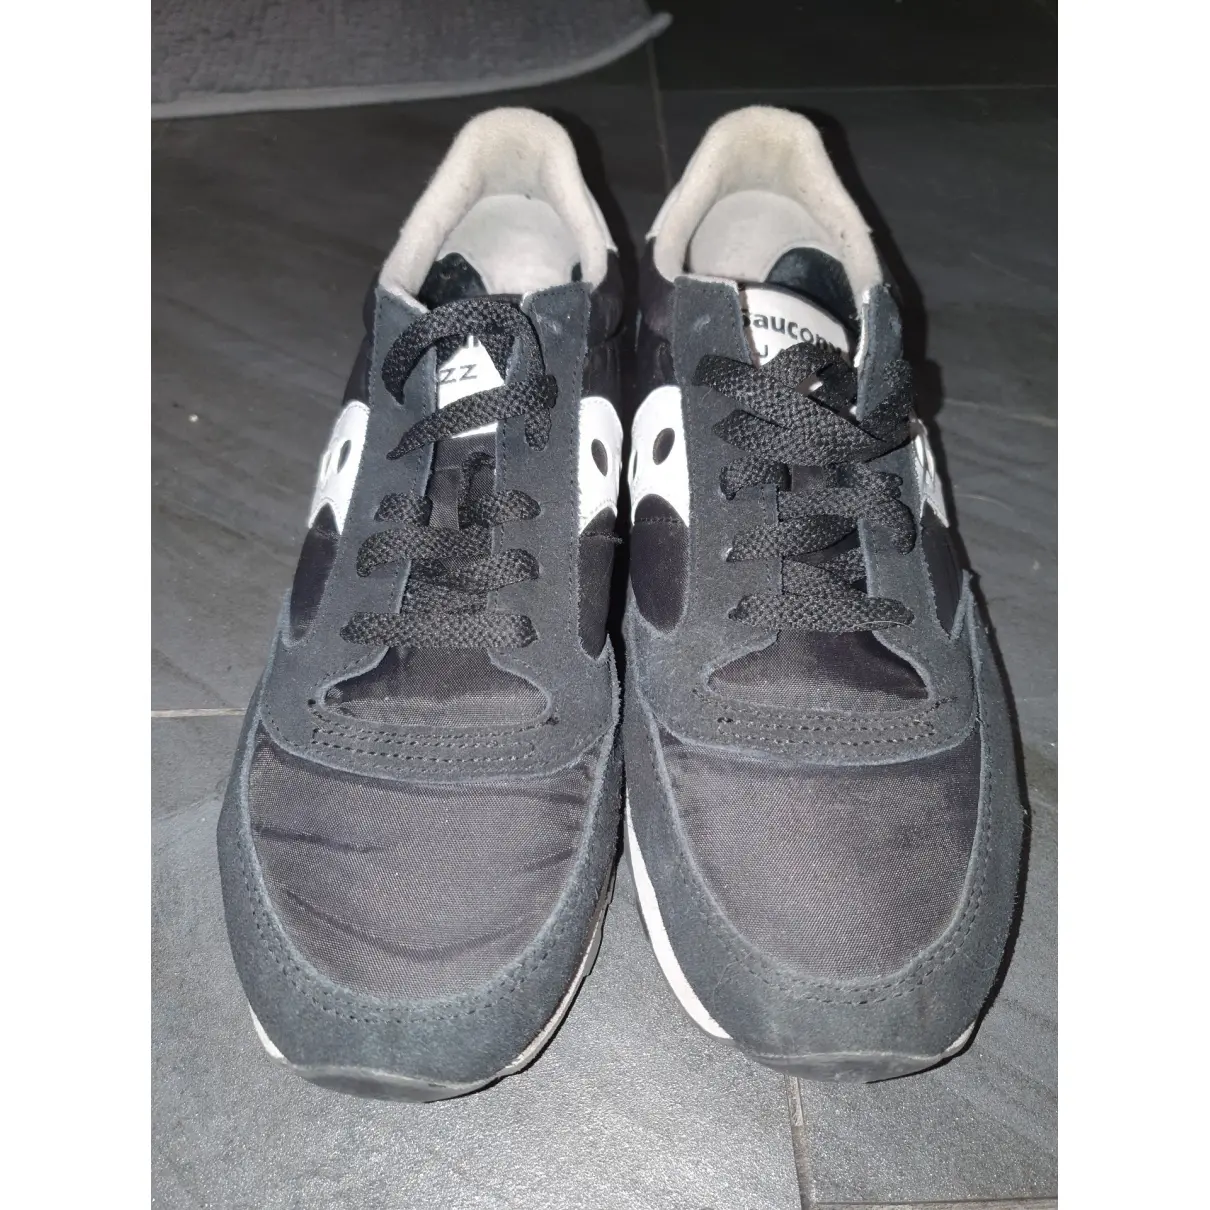 Saucony Low trainers for sale